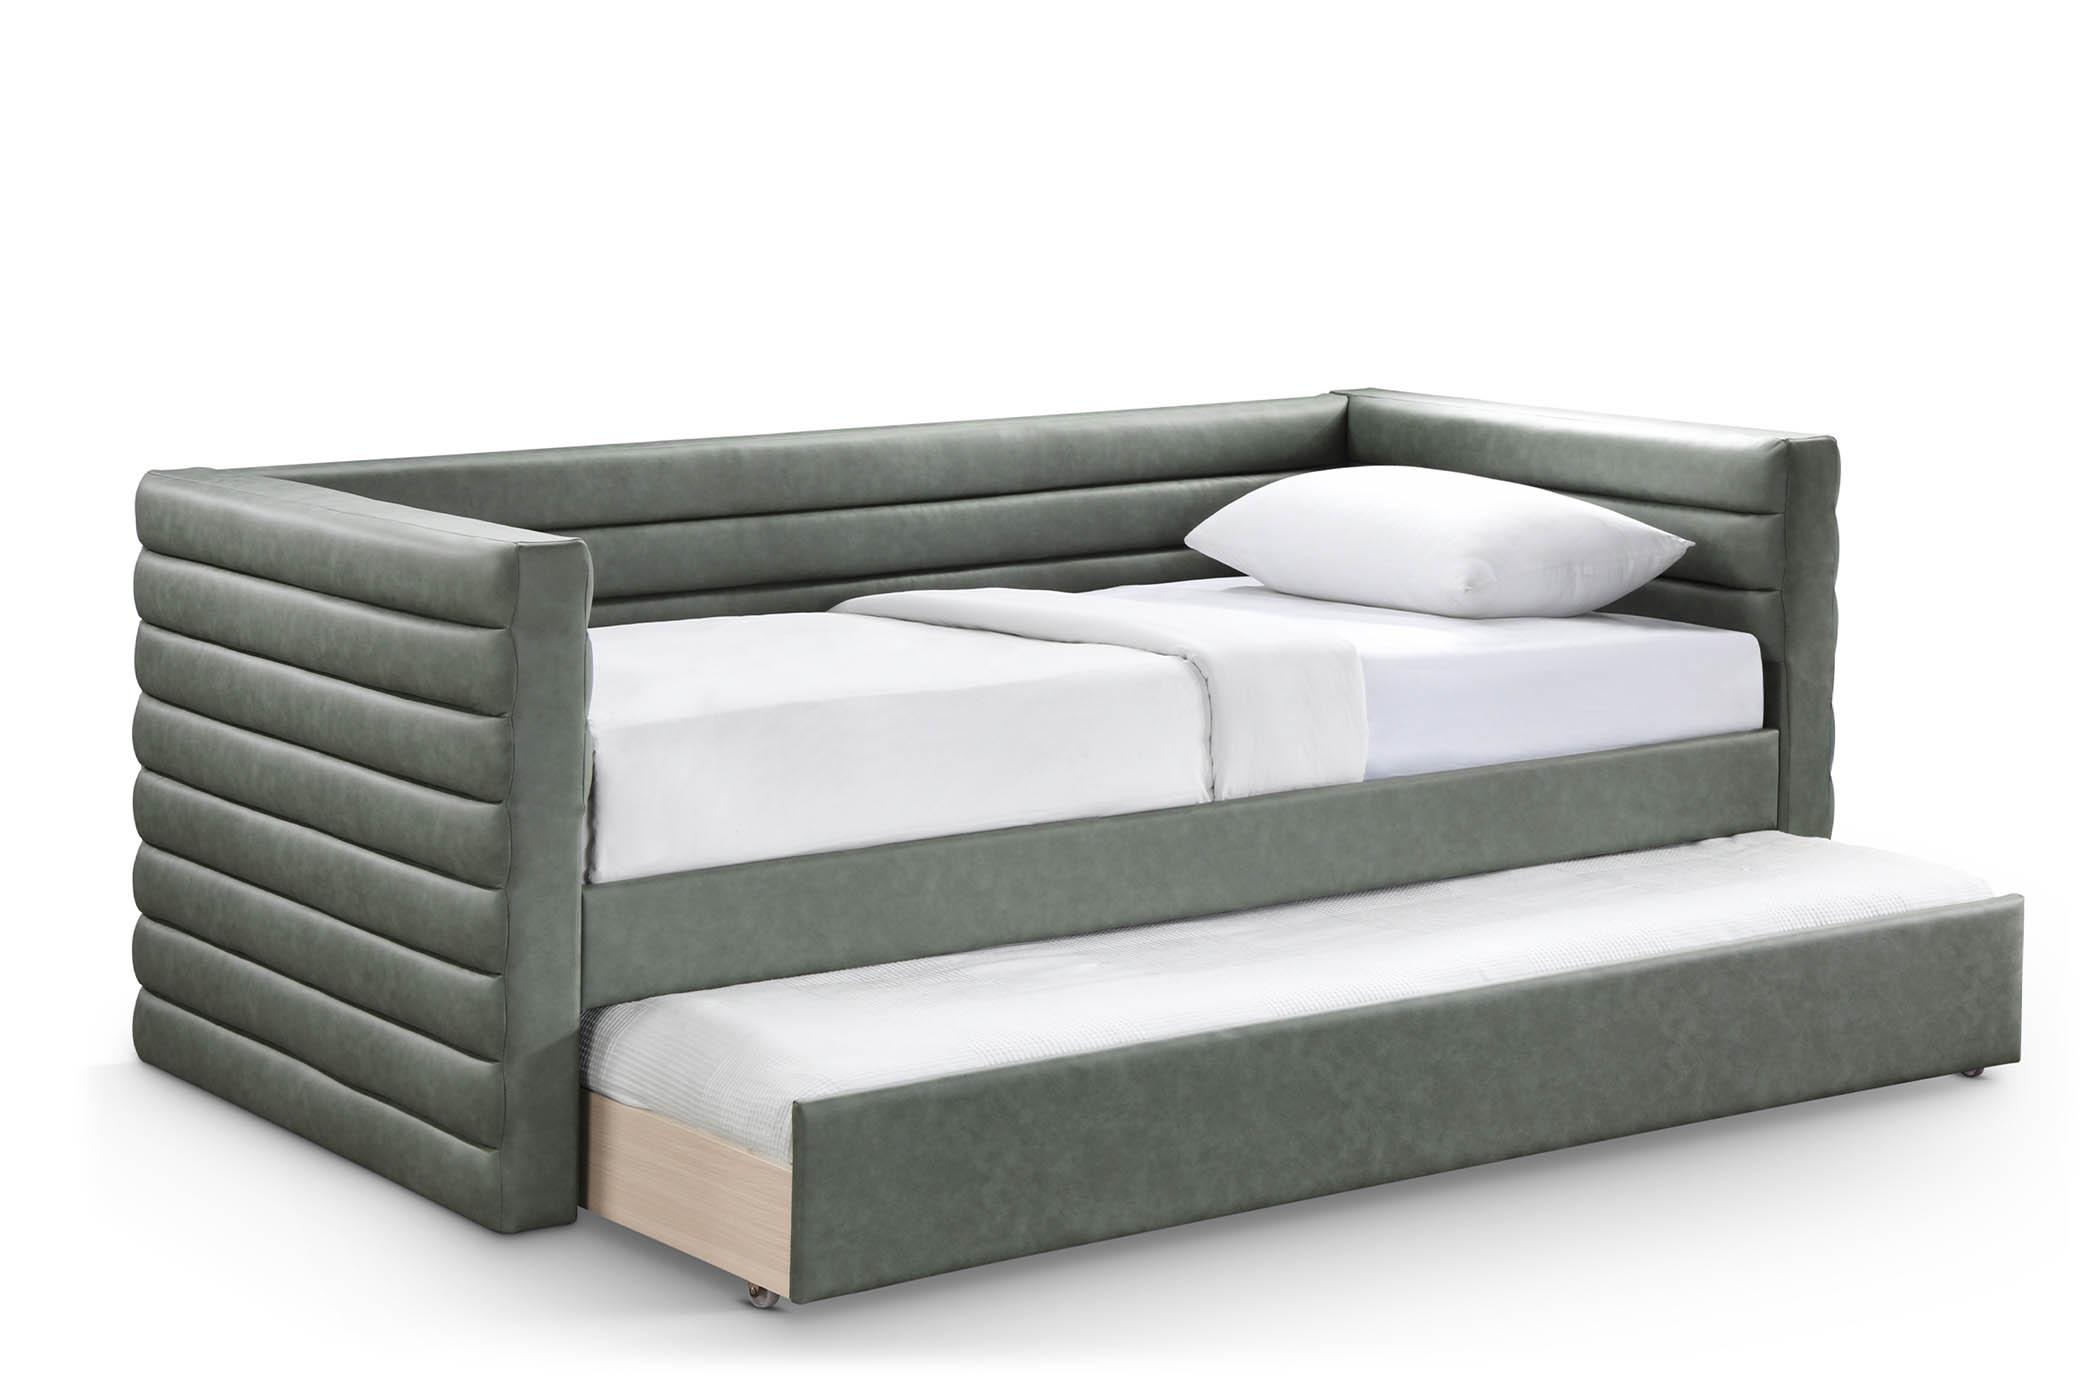 Meridian Furniture BeverlyGreen-T Daybed